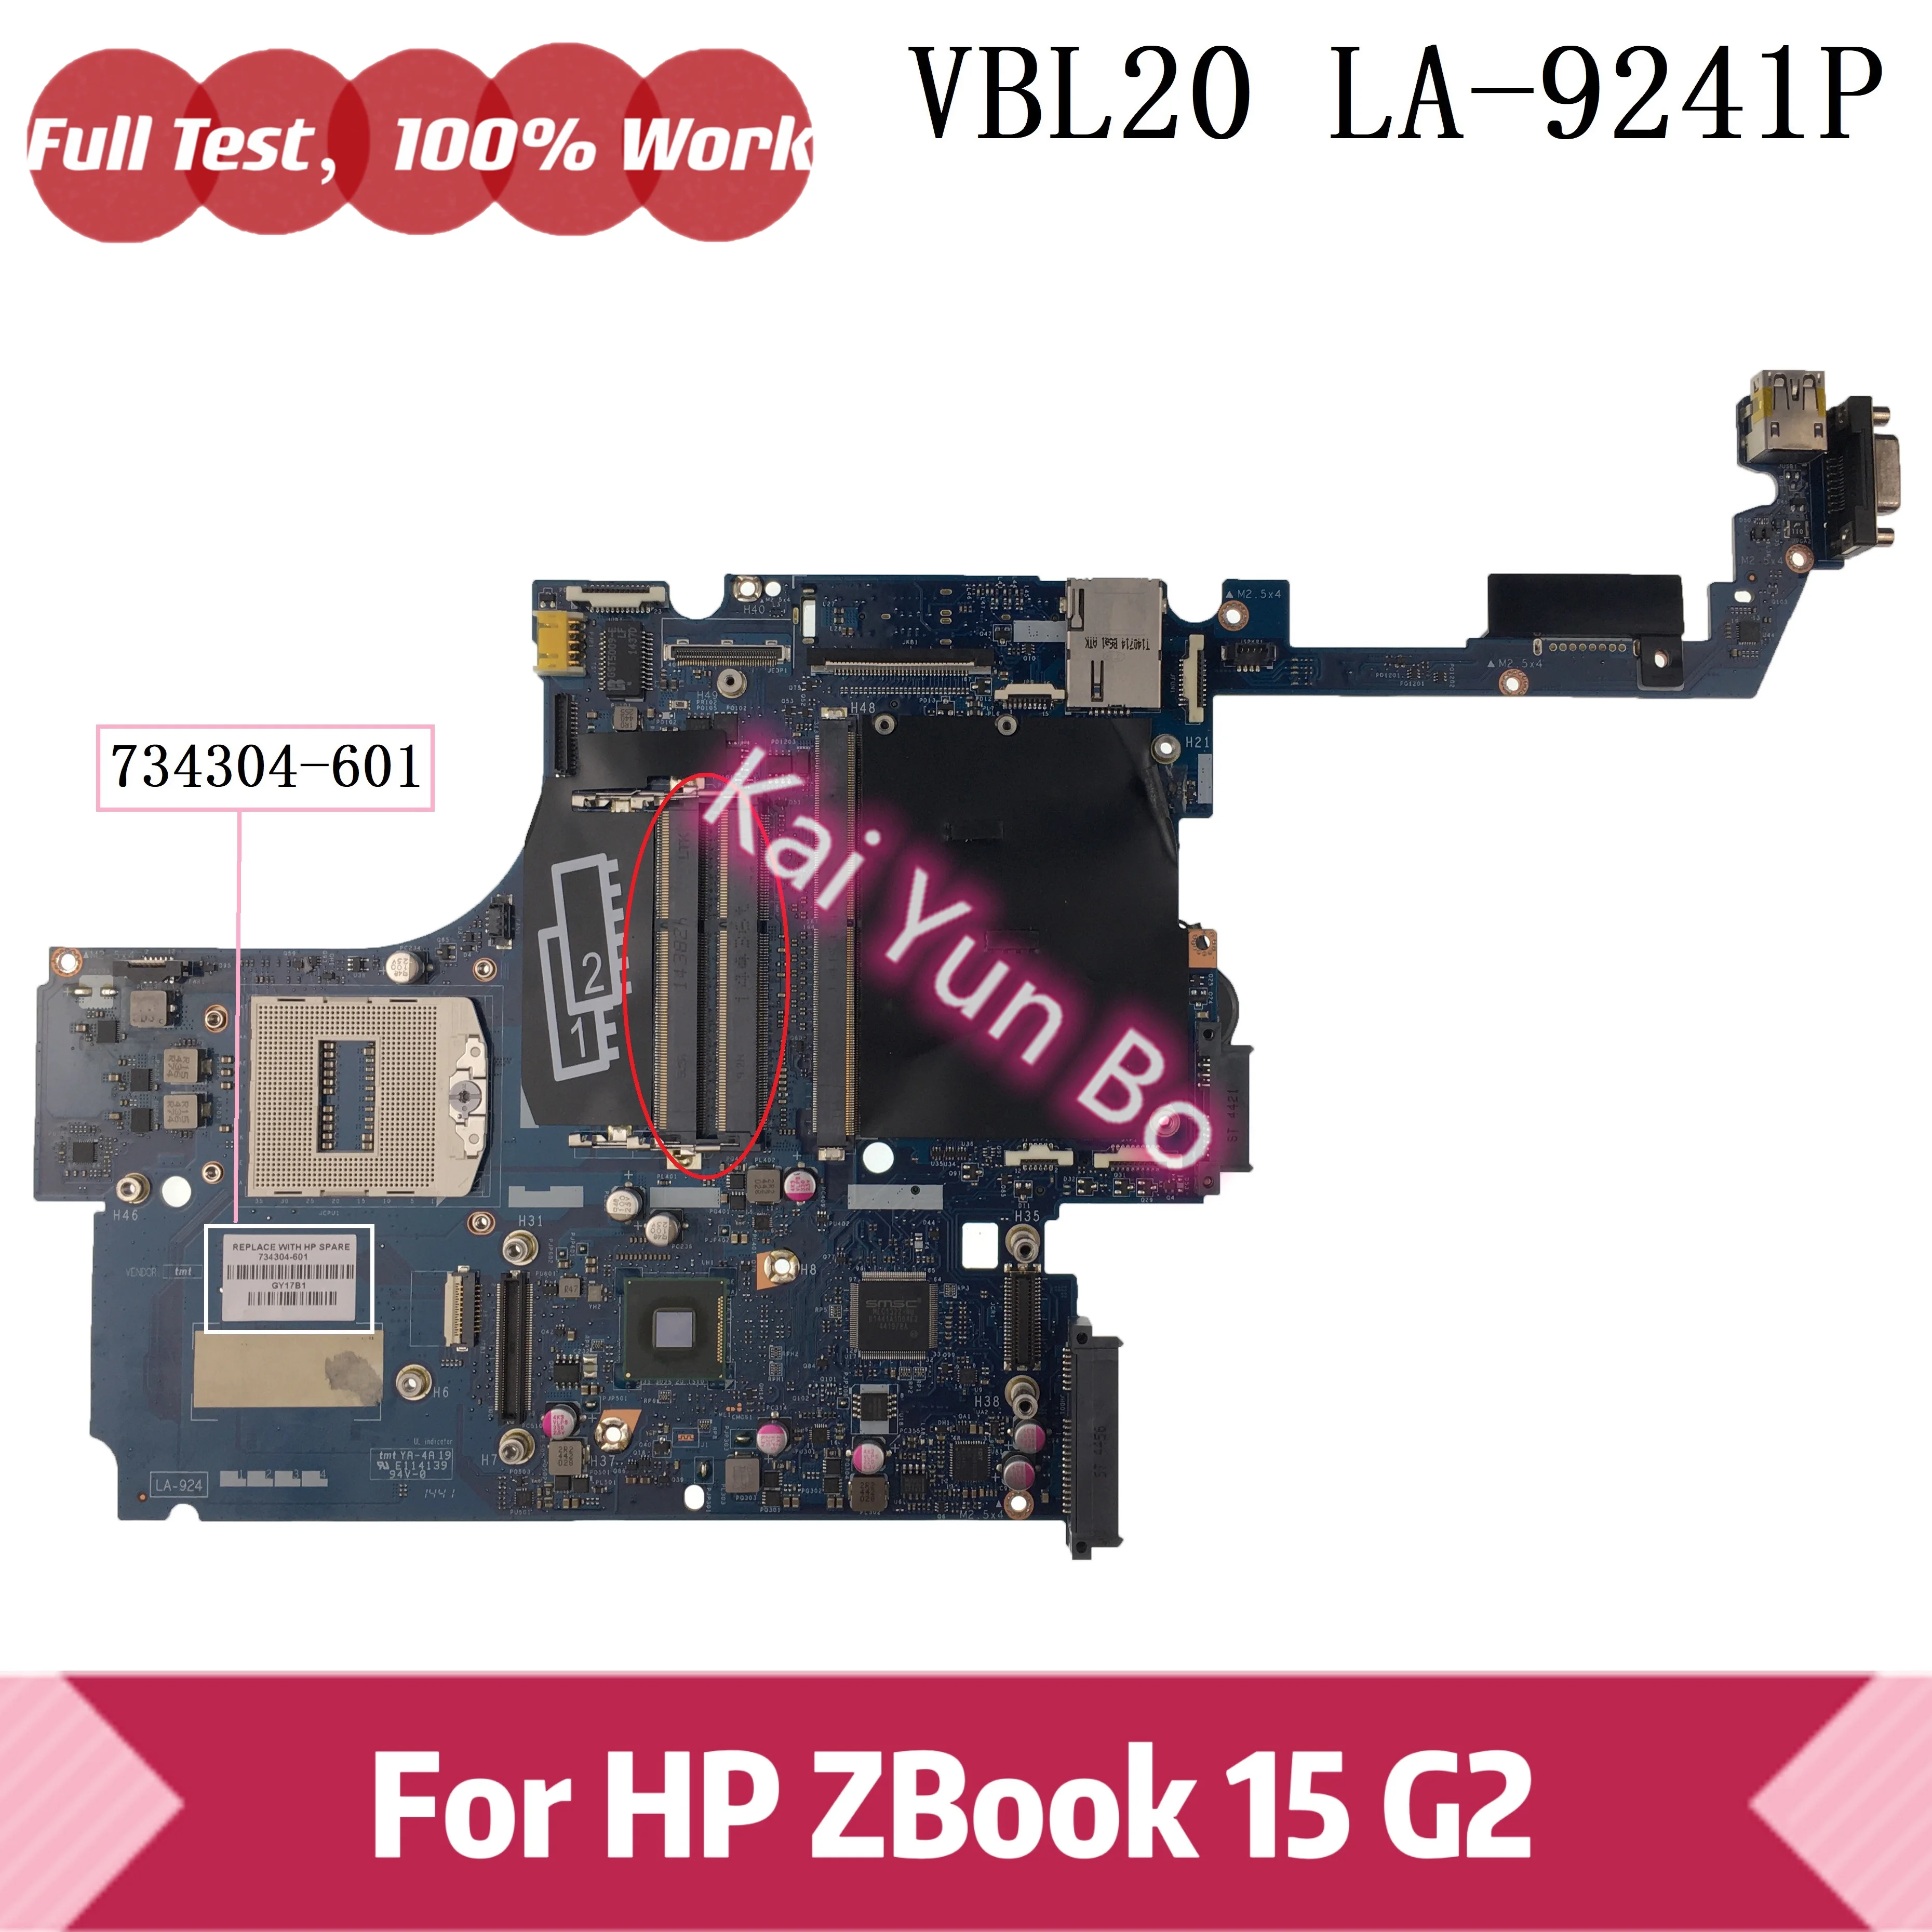 

VBL20 LA-9241P For HP ZBook 15 G1 ZBOOK15 G1 Laptop Motherboard 734304-501 734304-001 734304-601 Mainboard QM87 100% Tested OK